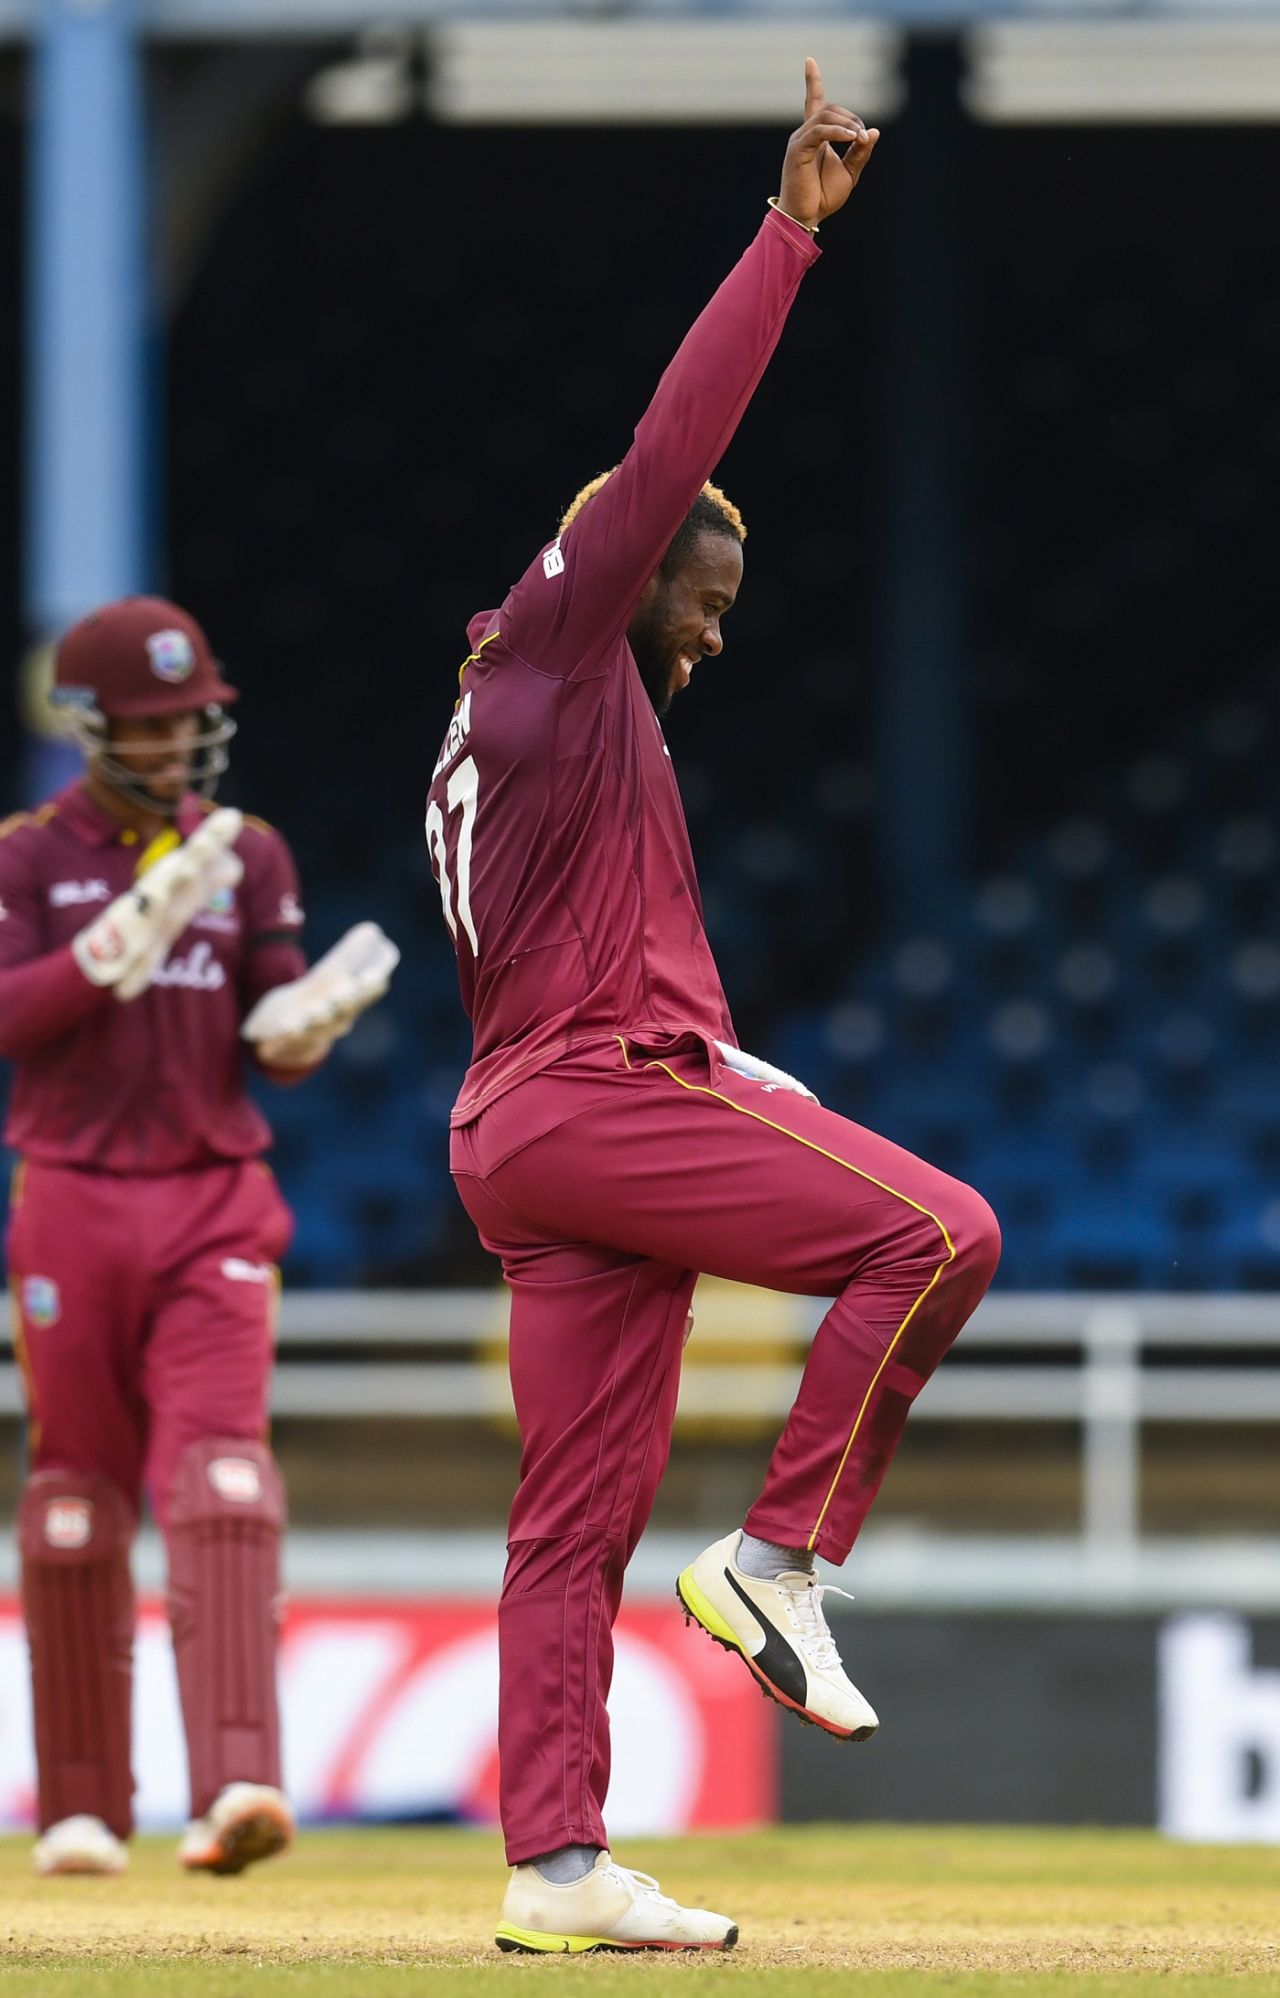 Fabian Allen celebrates a wicket, West Indies v India, 3rd ODI, Port-of-Spain, August 14, 2019